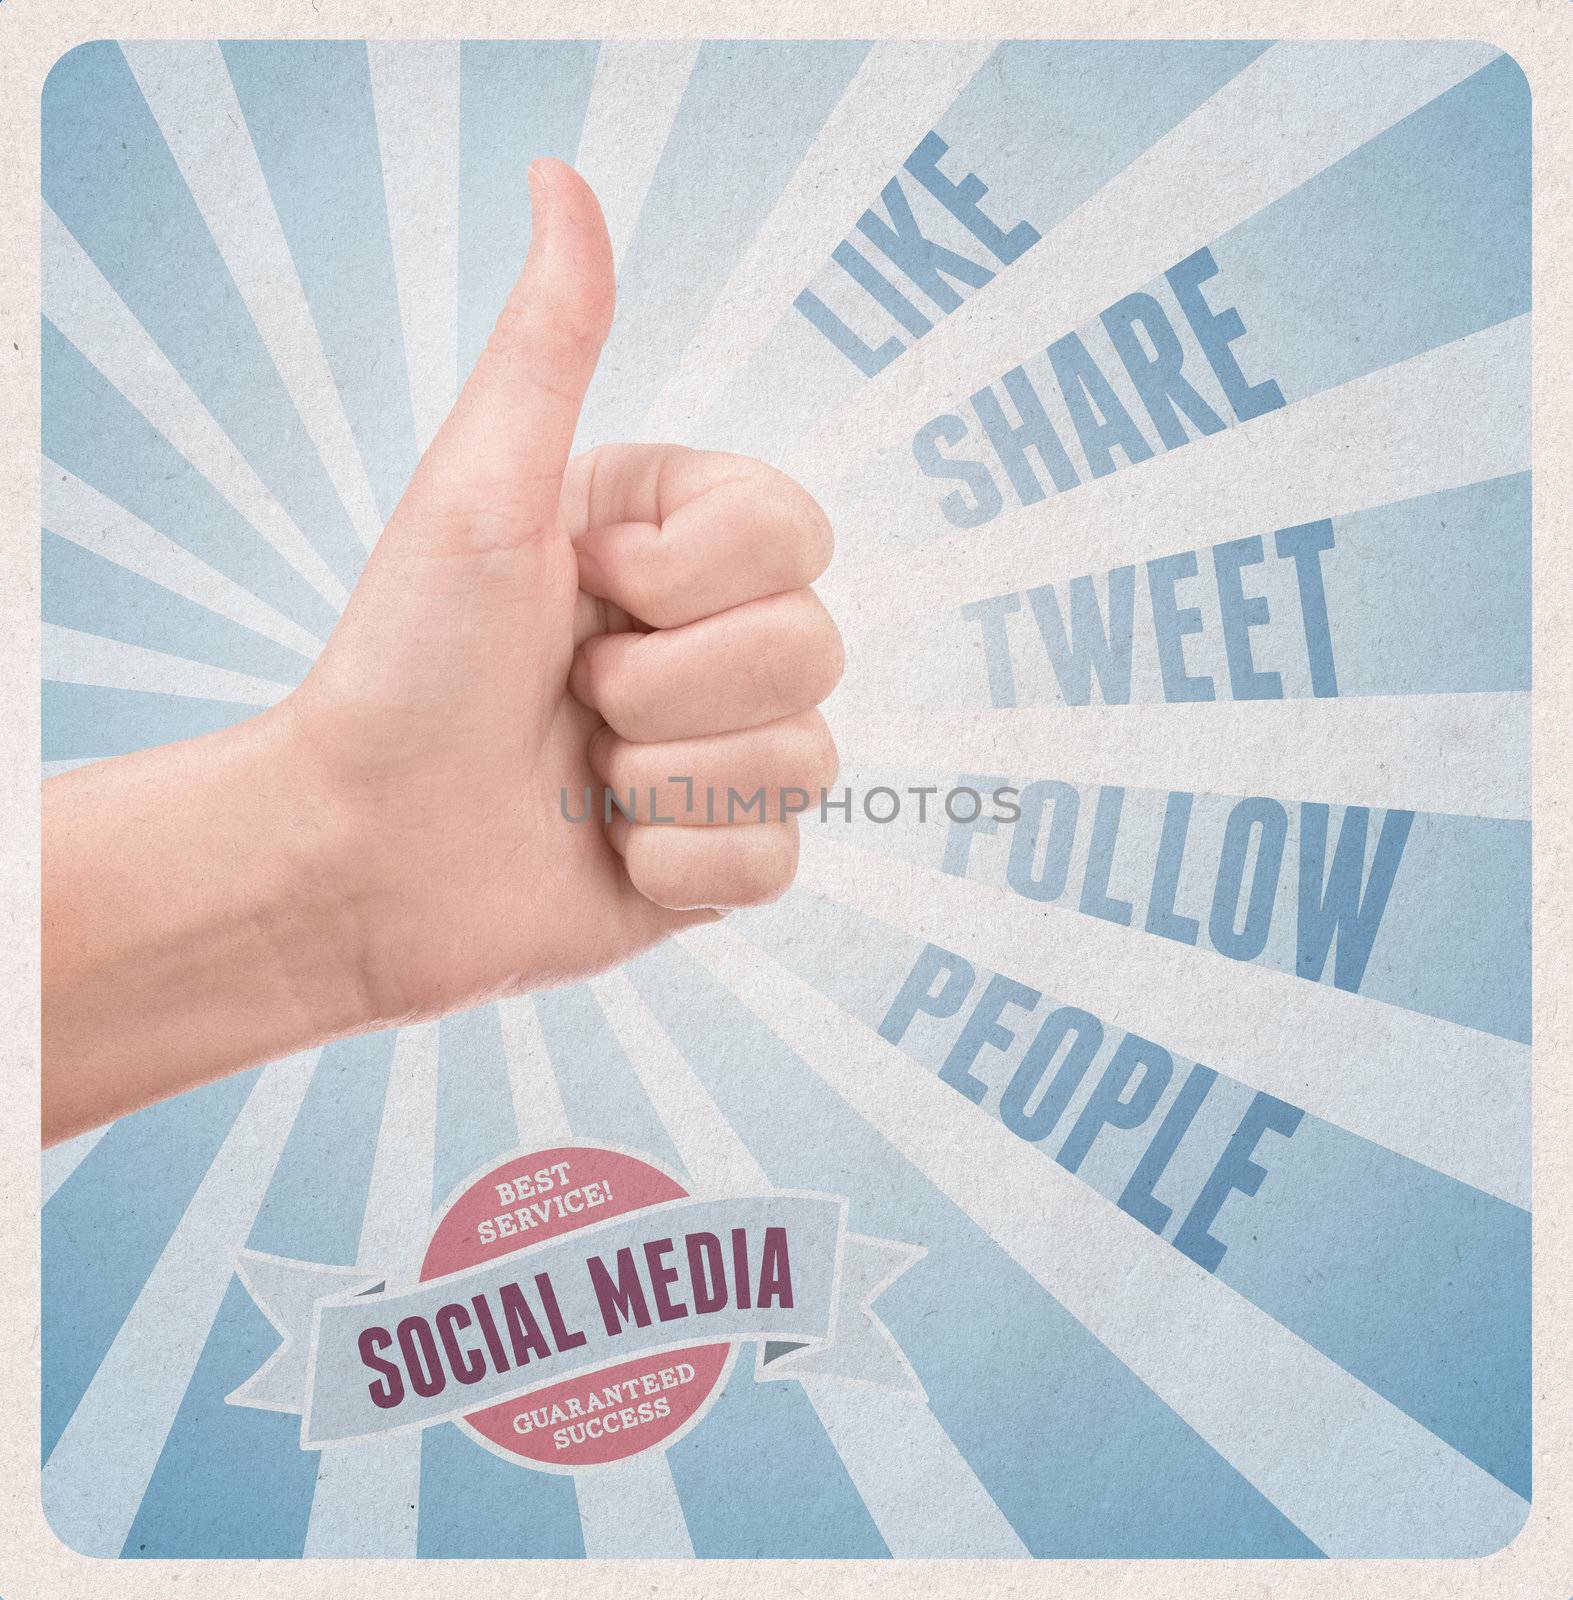 Retro style poster with hand showing thumb up gesture surrounded with keywords on social media theme